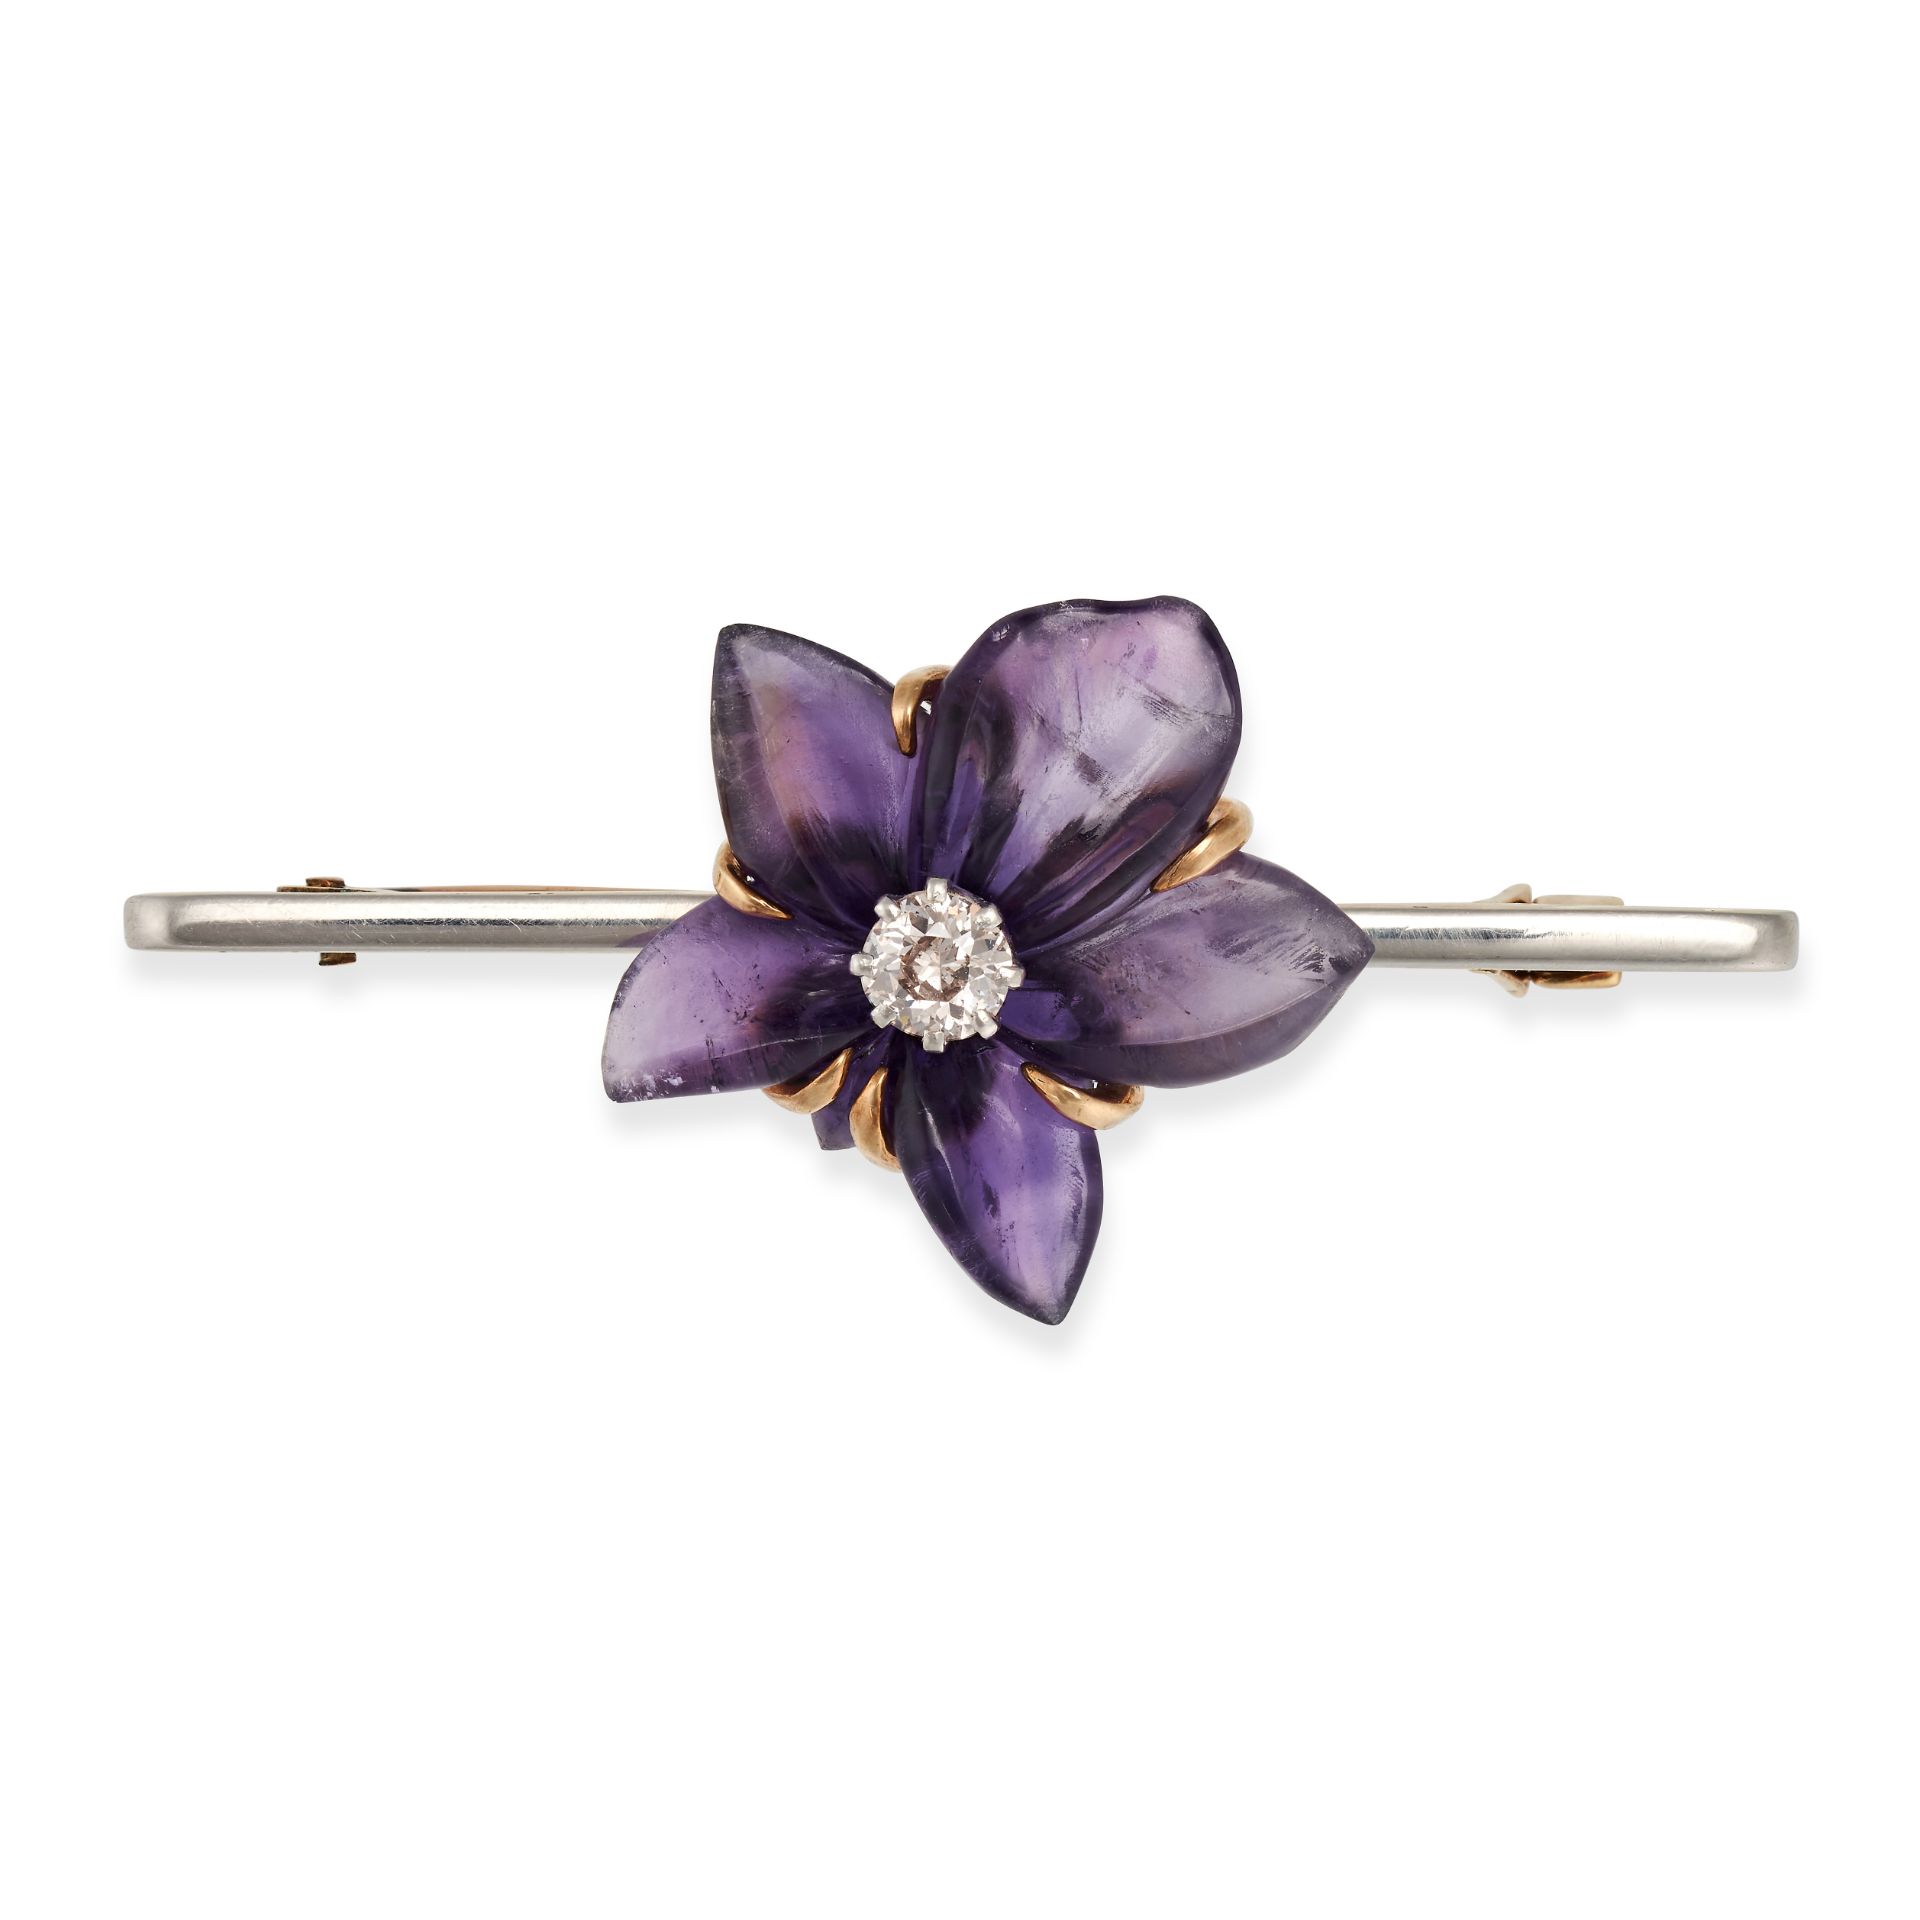 AN AMETHYST AND DIAMOND FLOWER BROOCH in yellow gold and platinum, comprising a carved amethyst f...